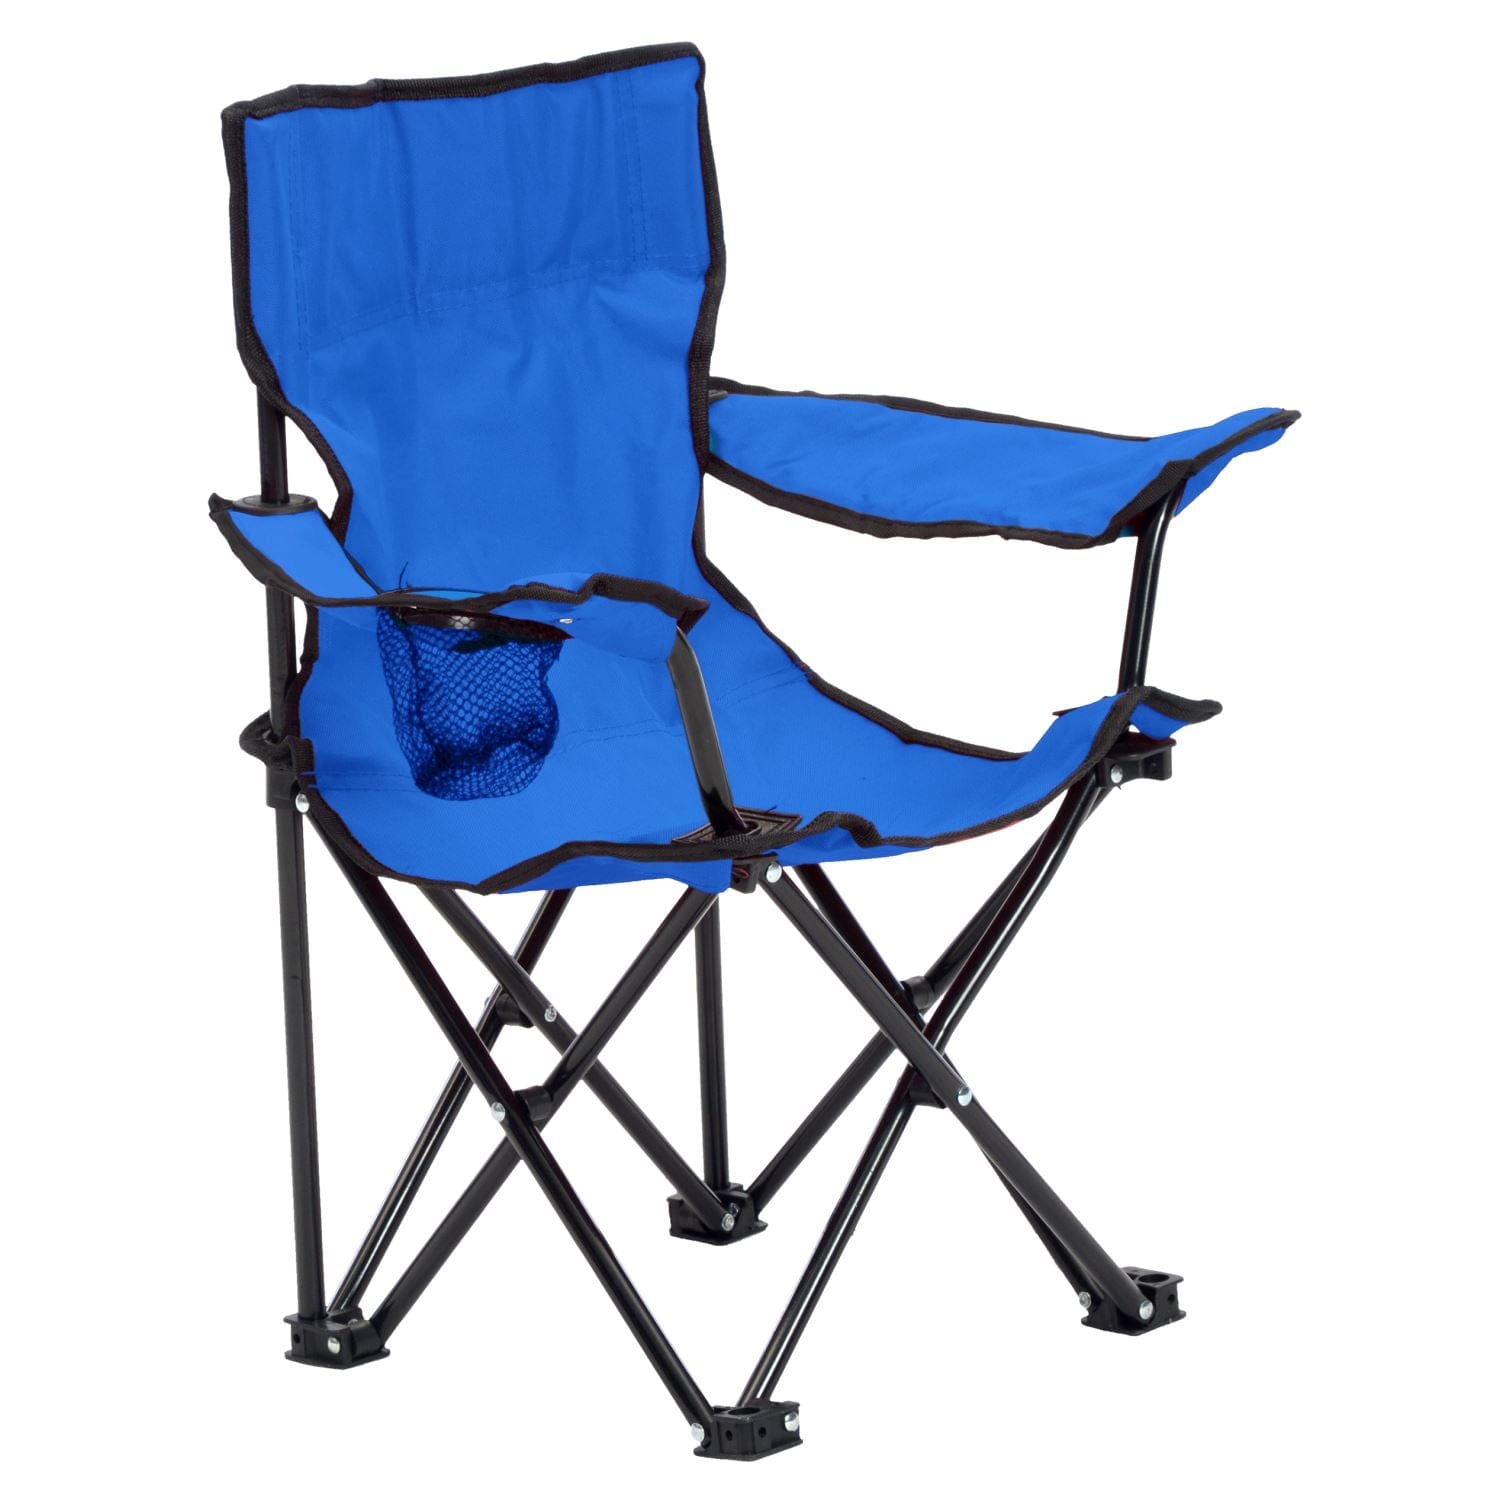 The Fulfiller Portable Chairs Quik Chair | Kid's Folding Chair - Blue 167561DS